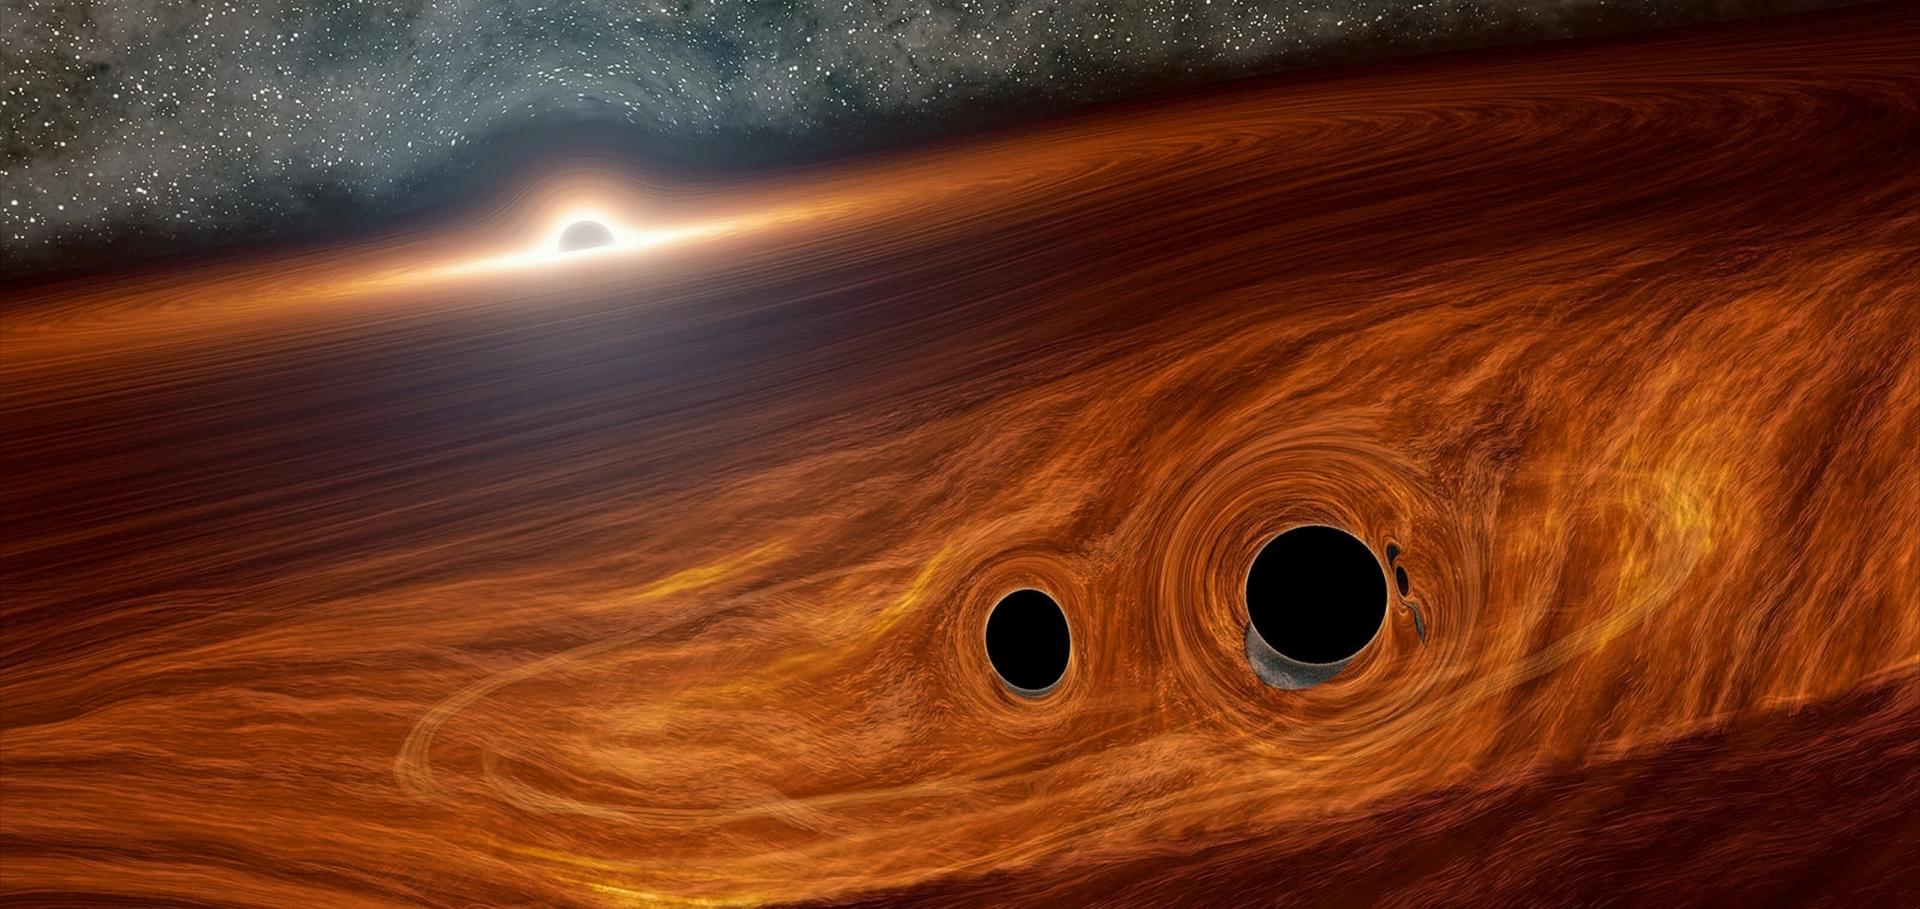 An illustration of a black hole binary within an AGN disk